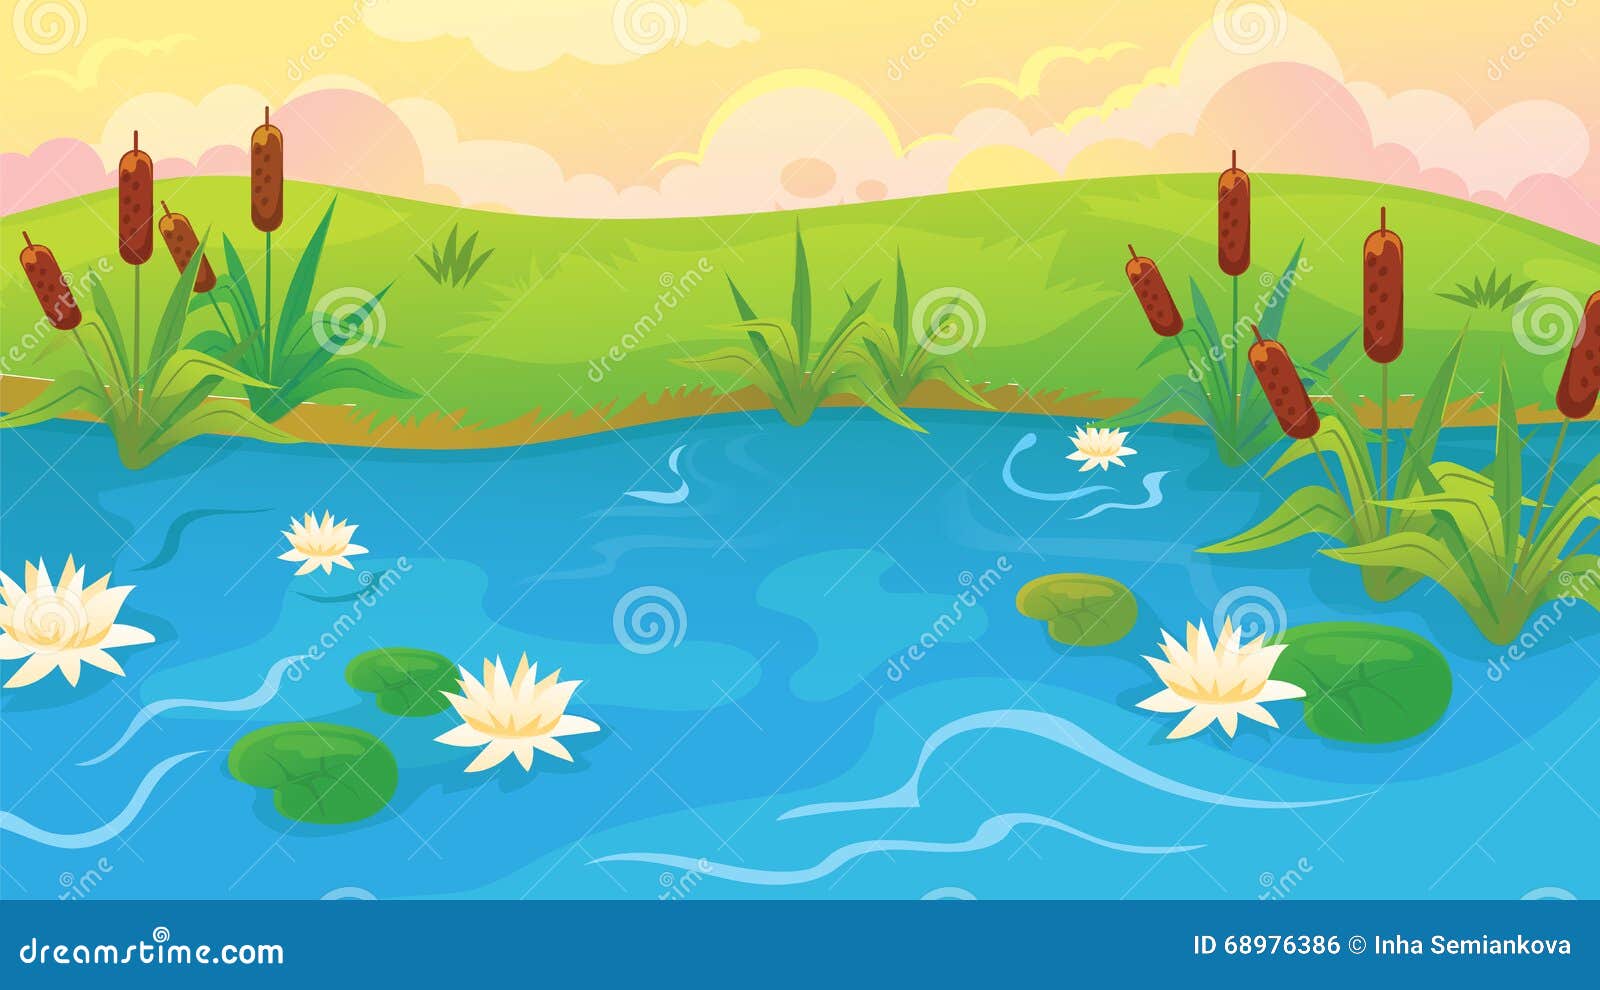 pond with reeds and lilies